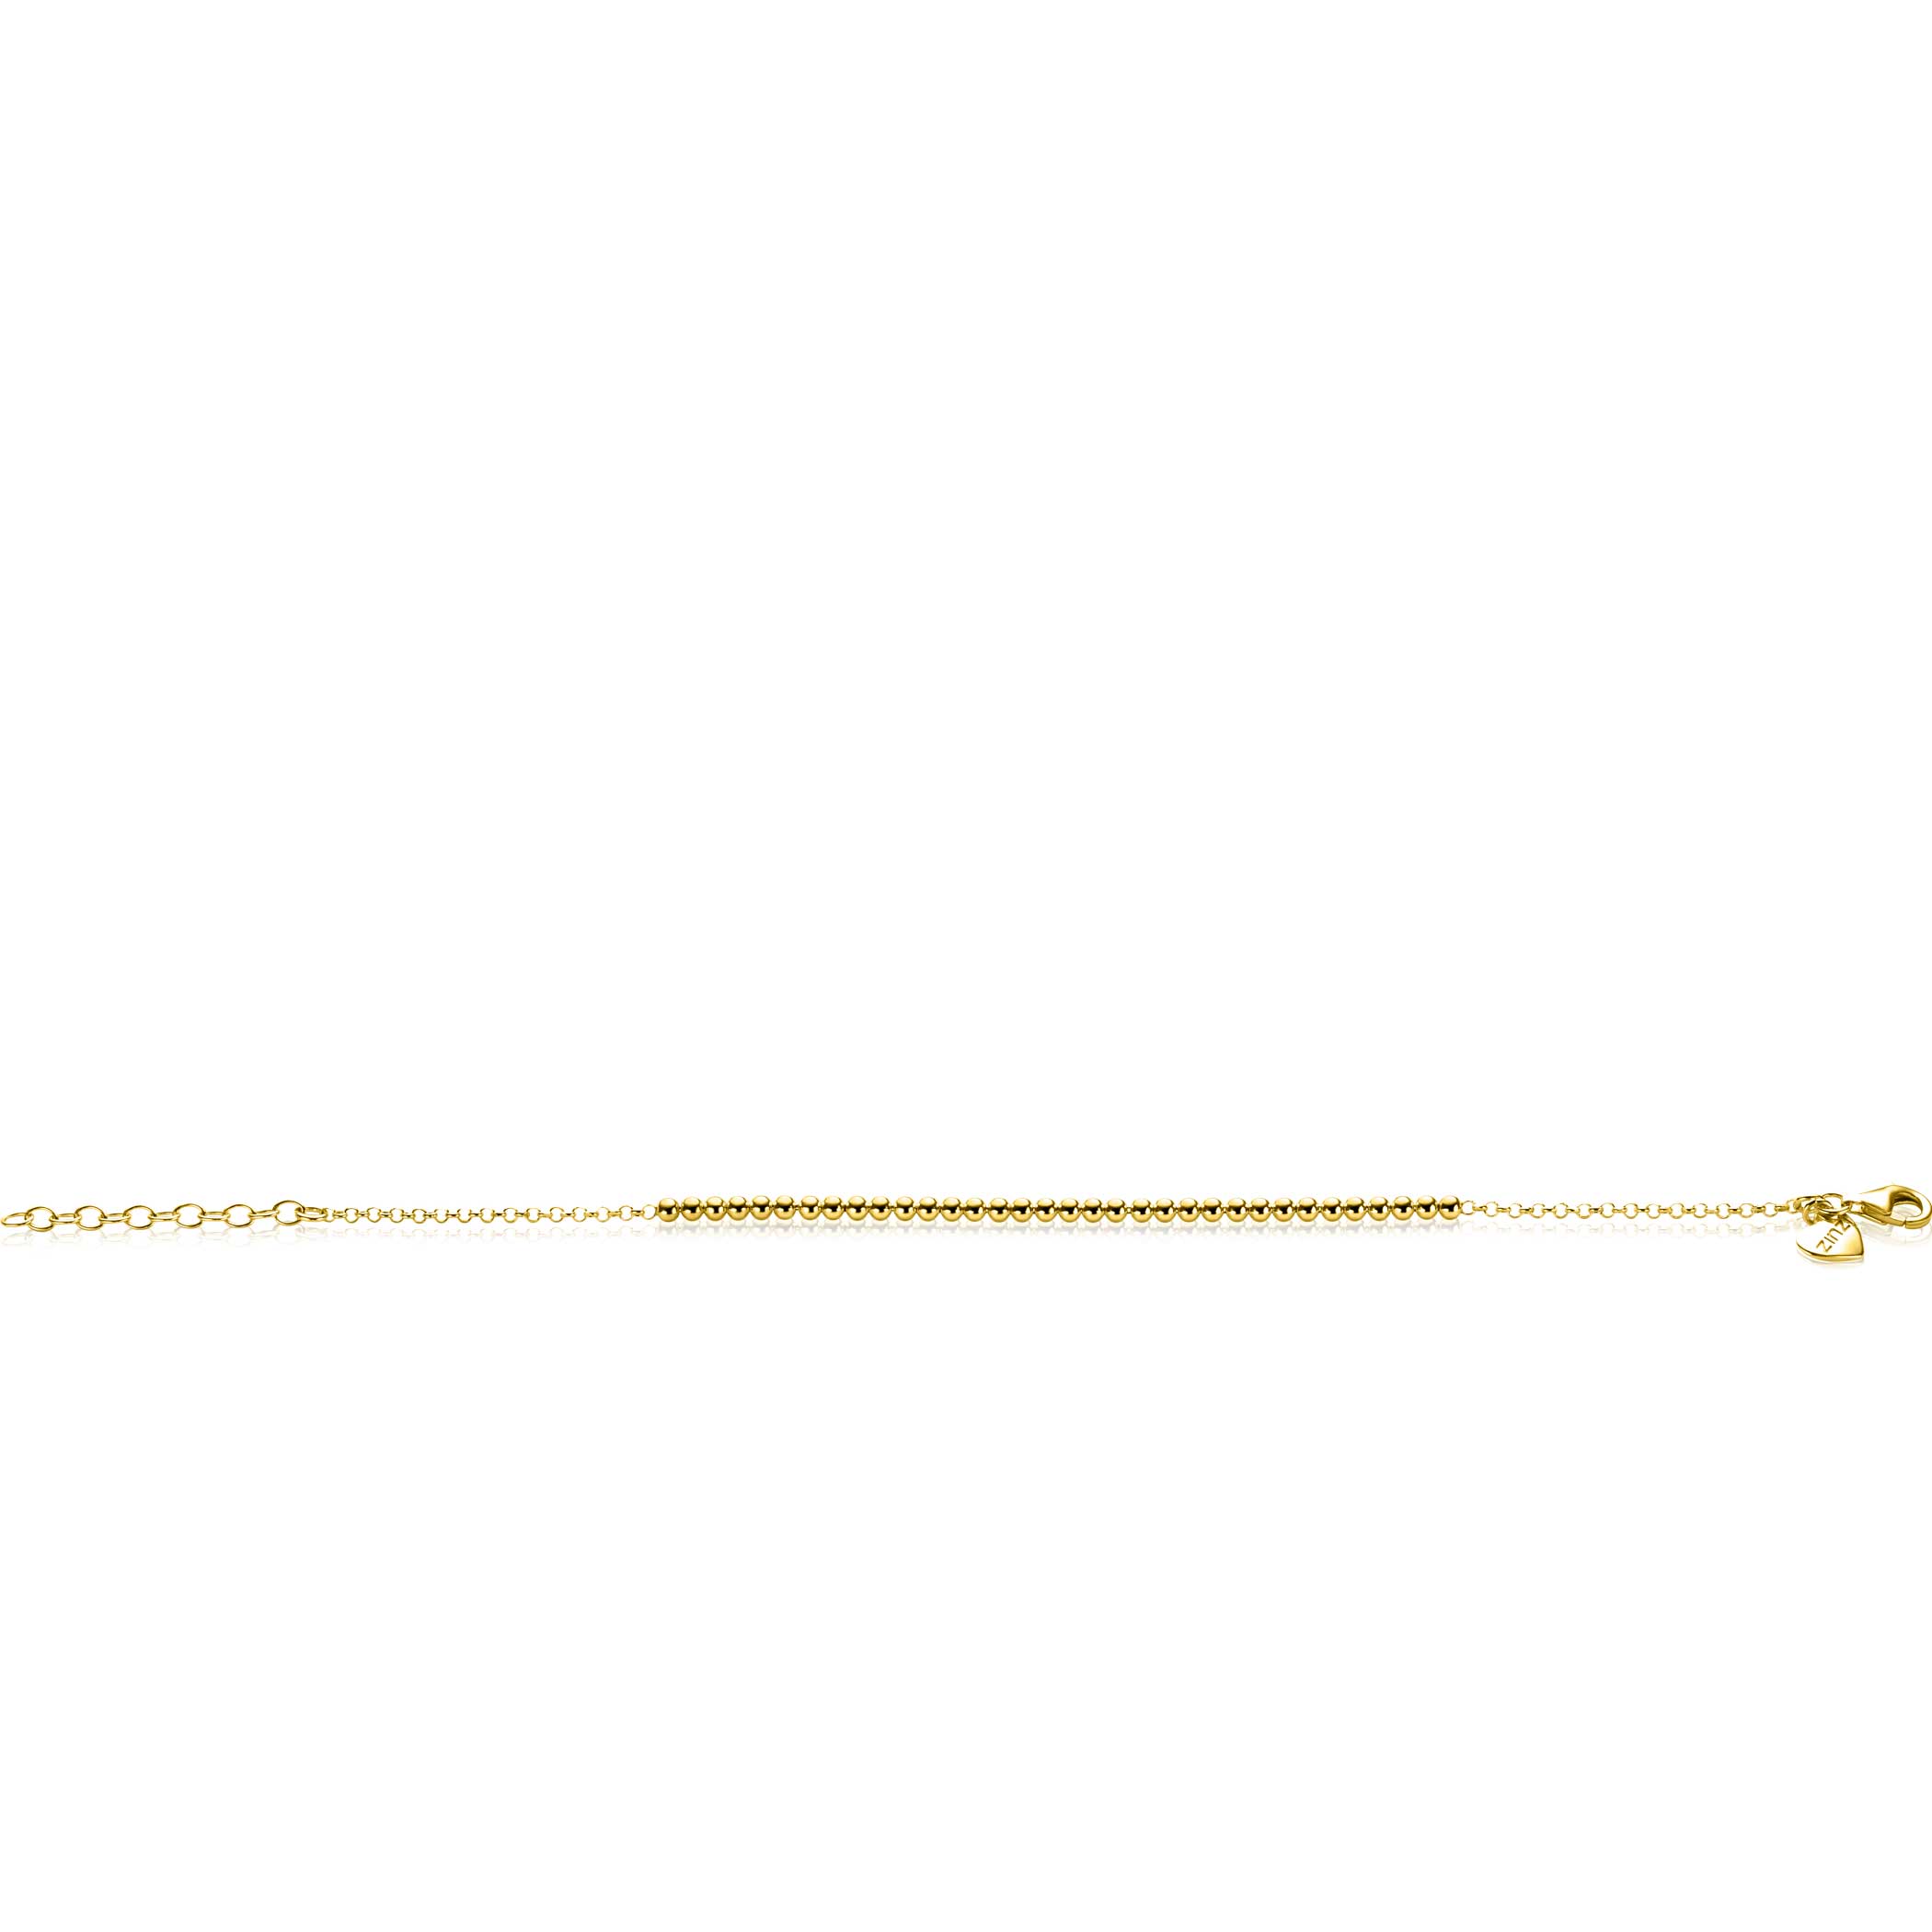 ZINZI gold plated silver jasseron bracelet with bead links (2.5mm wide) in the middle 16-19cm ZIA2640G